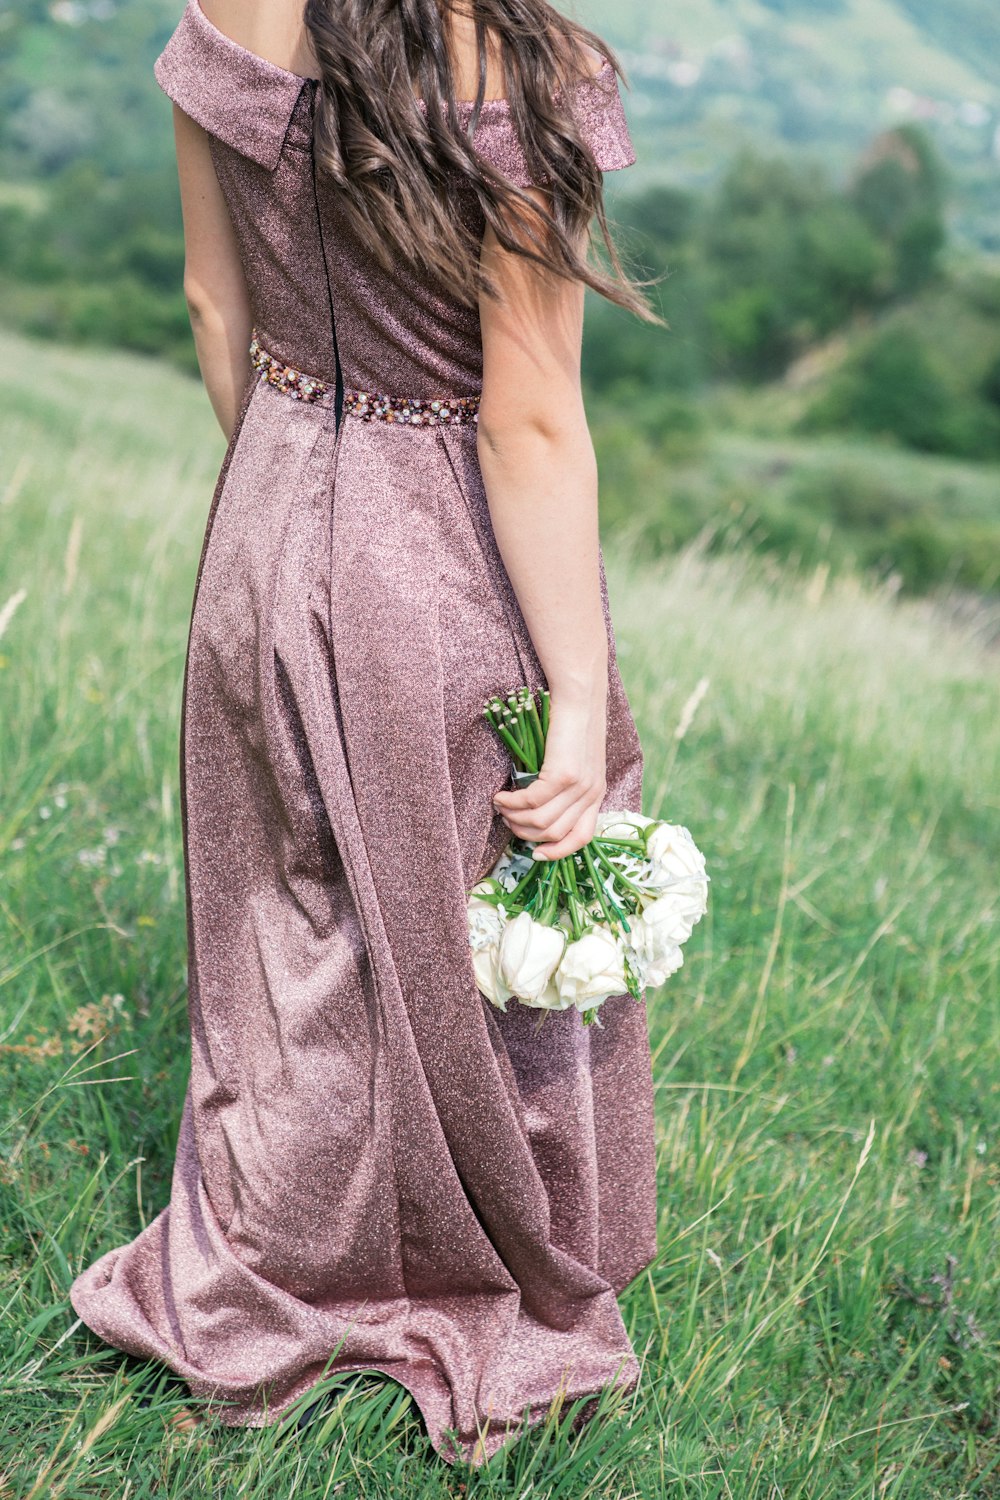 woman standing on grass fields holding bouquet of white flowers